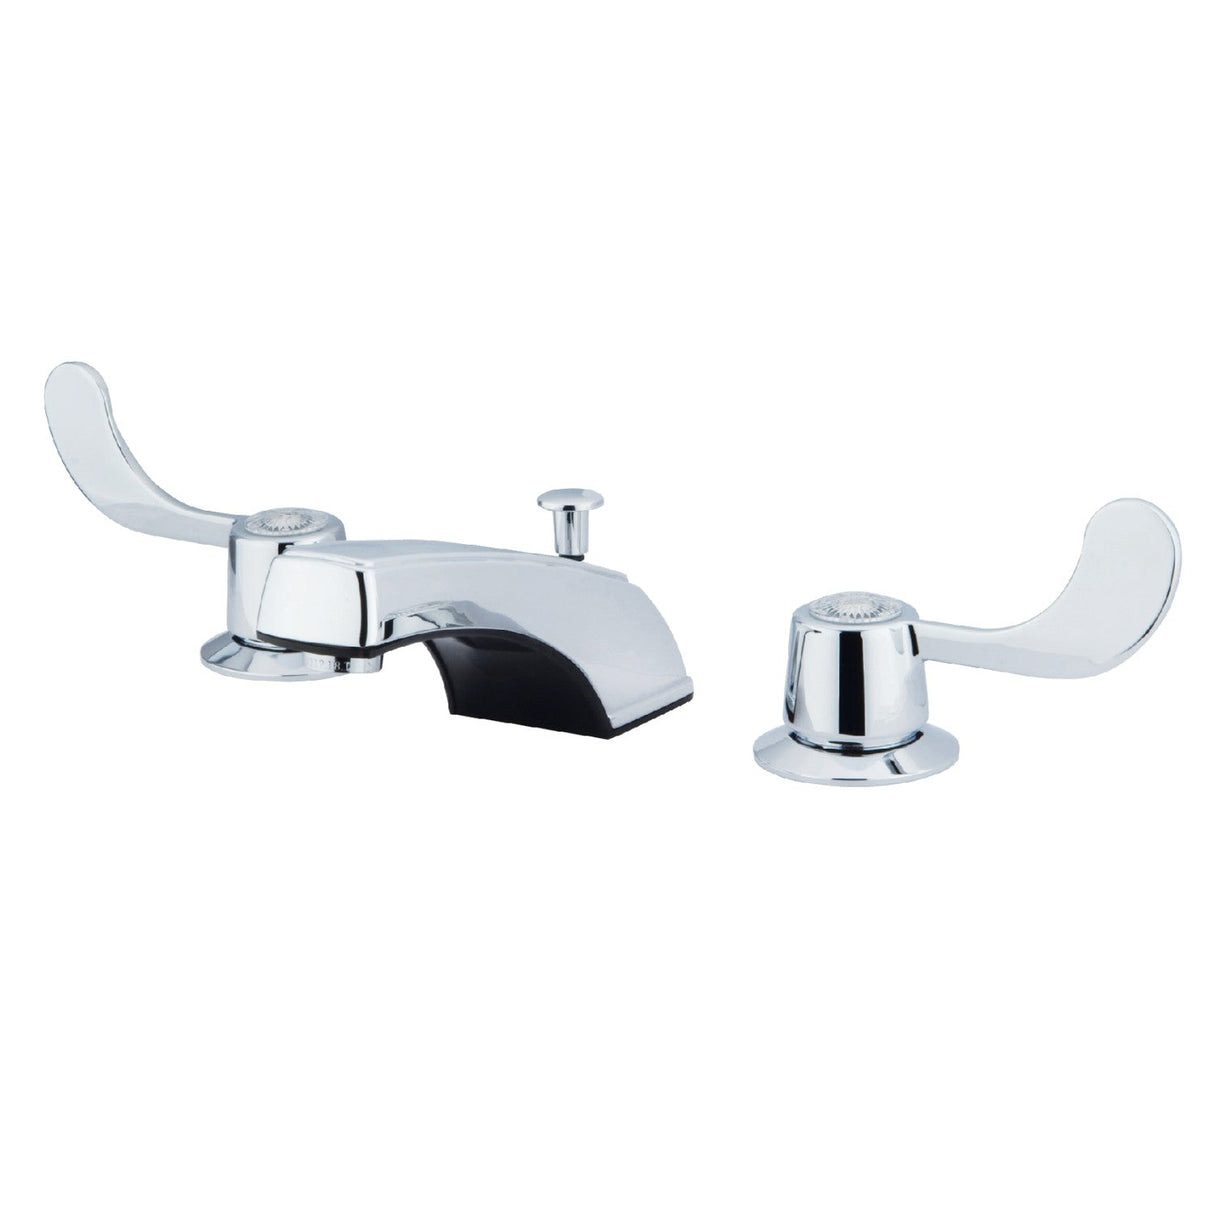 Vista GKB931B Two-Handle 3-Hole Deck Mount Widespread Bathroom Faucet with Retail Pop-Up, Polished Chrome